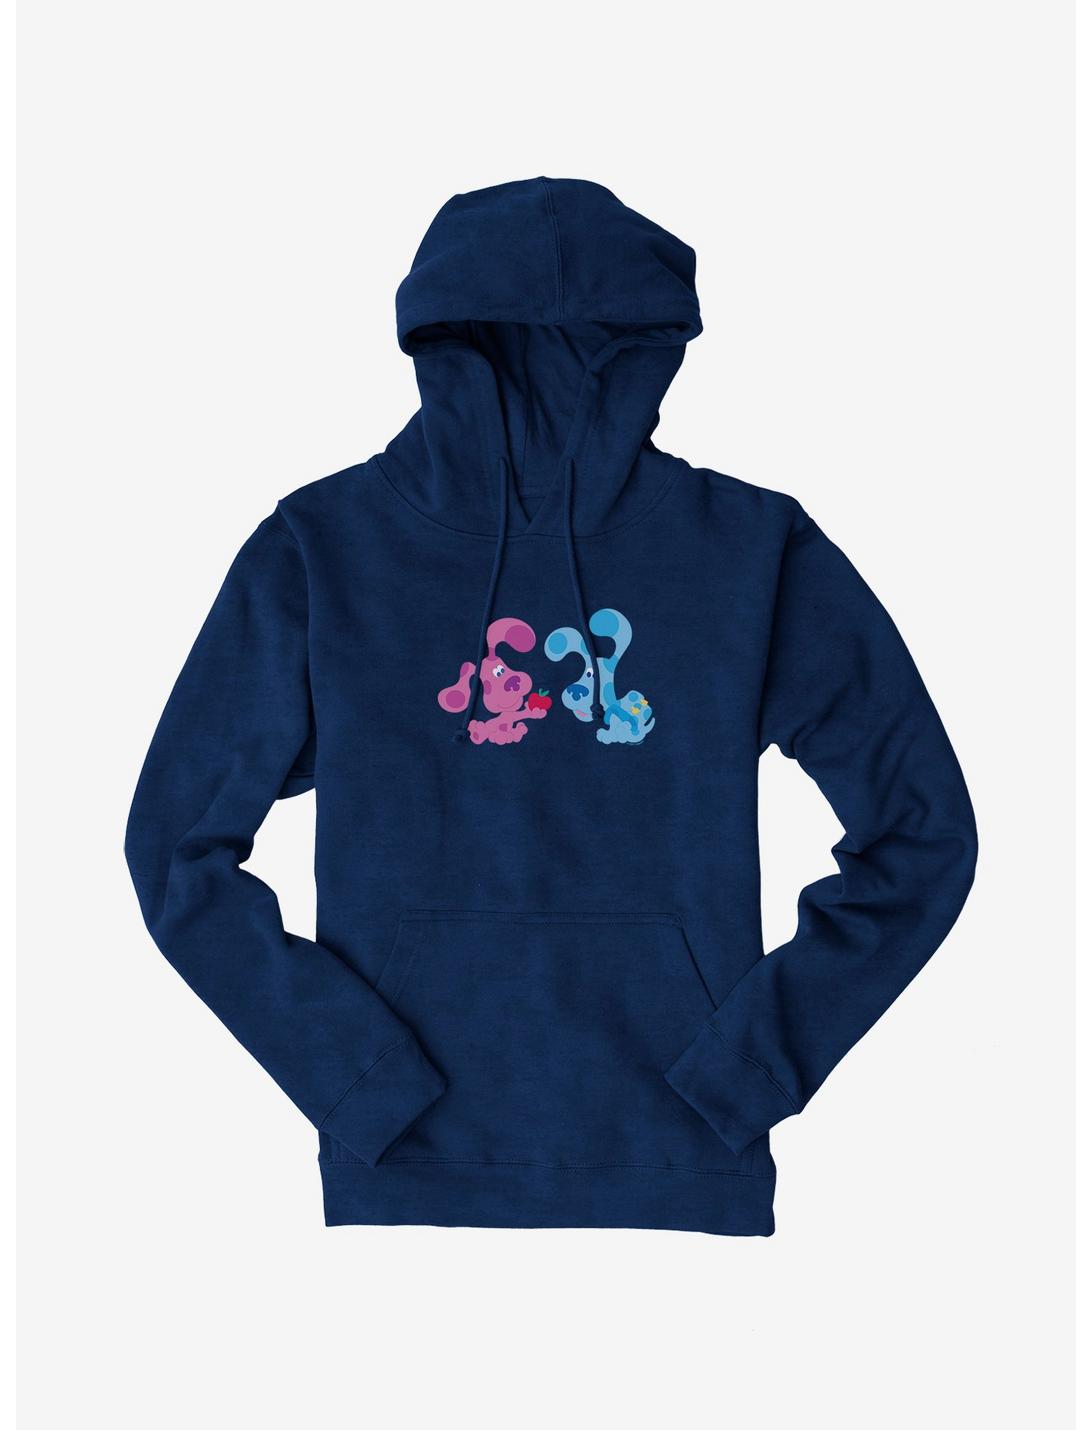 Blue's Clues Magenta And Blue Apple Hoodie, , hi-res